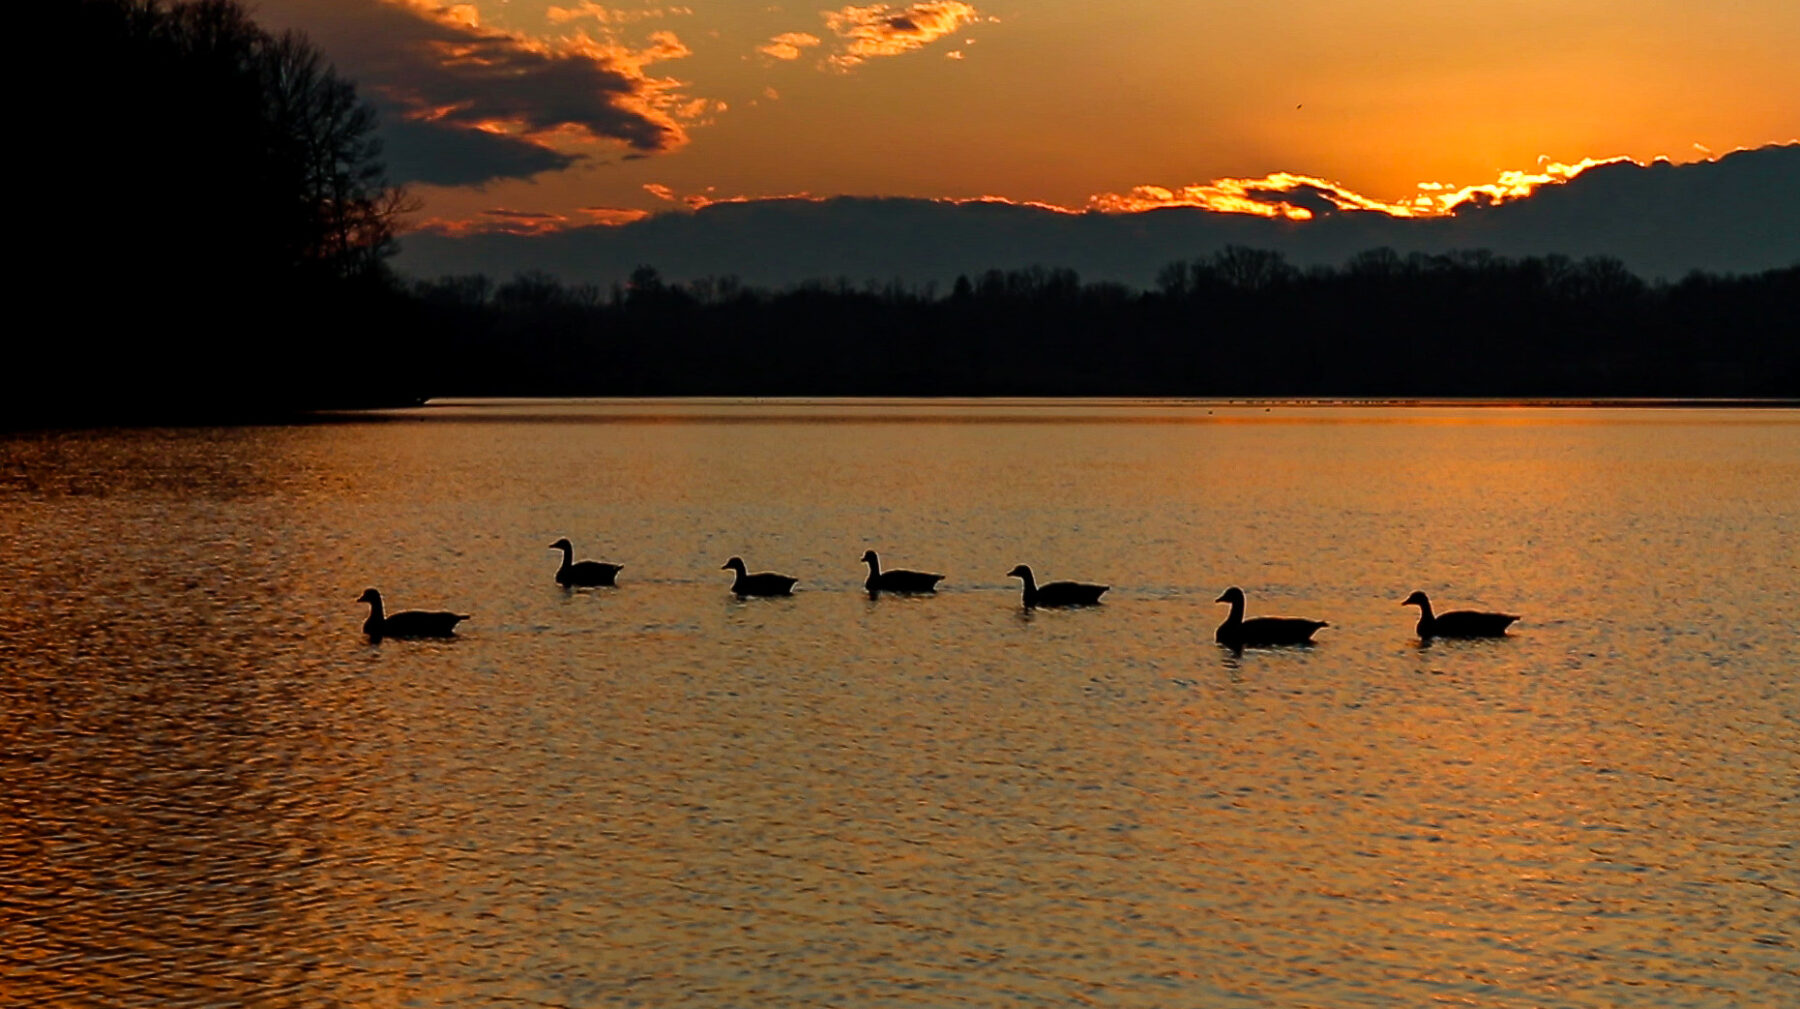 Group of geese on lake with sunset in the background